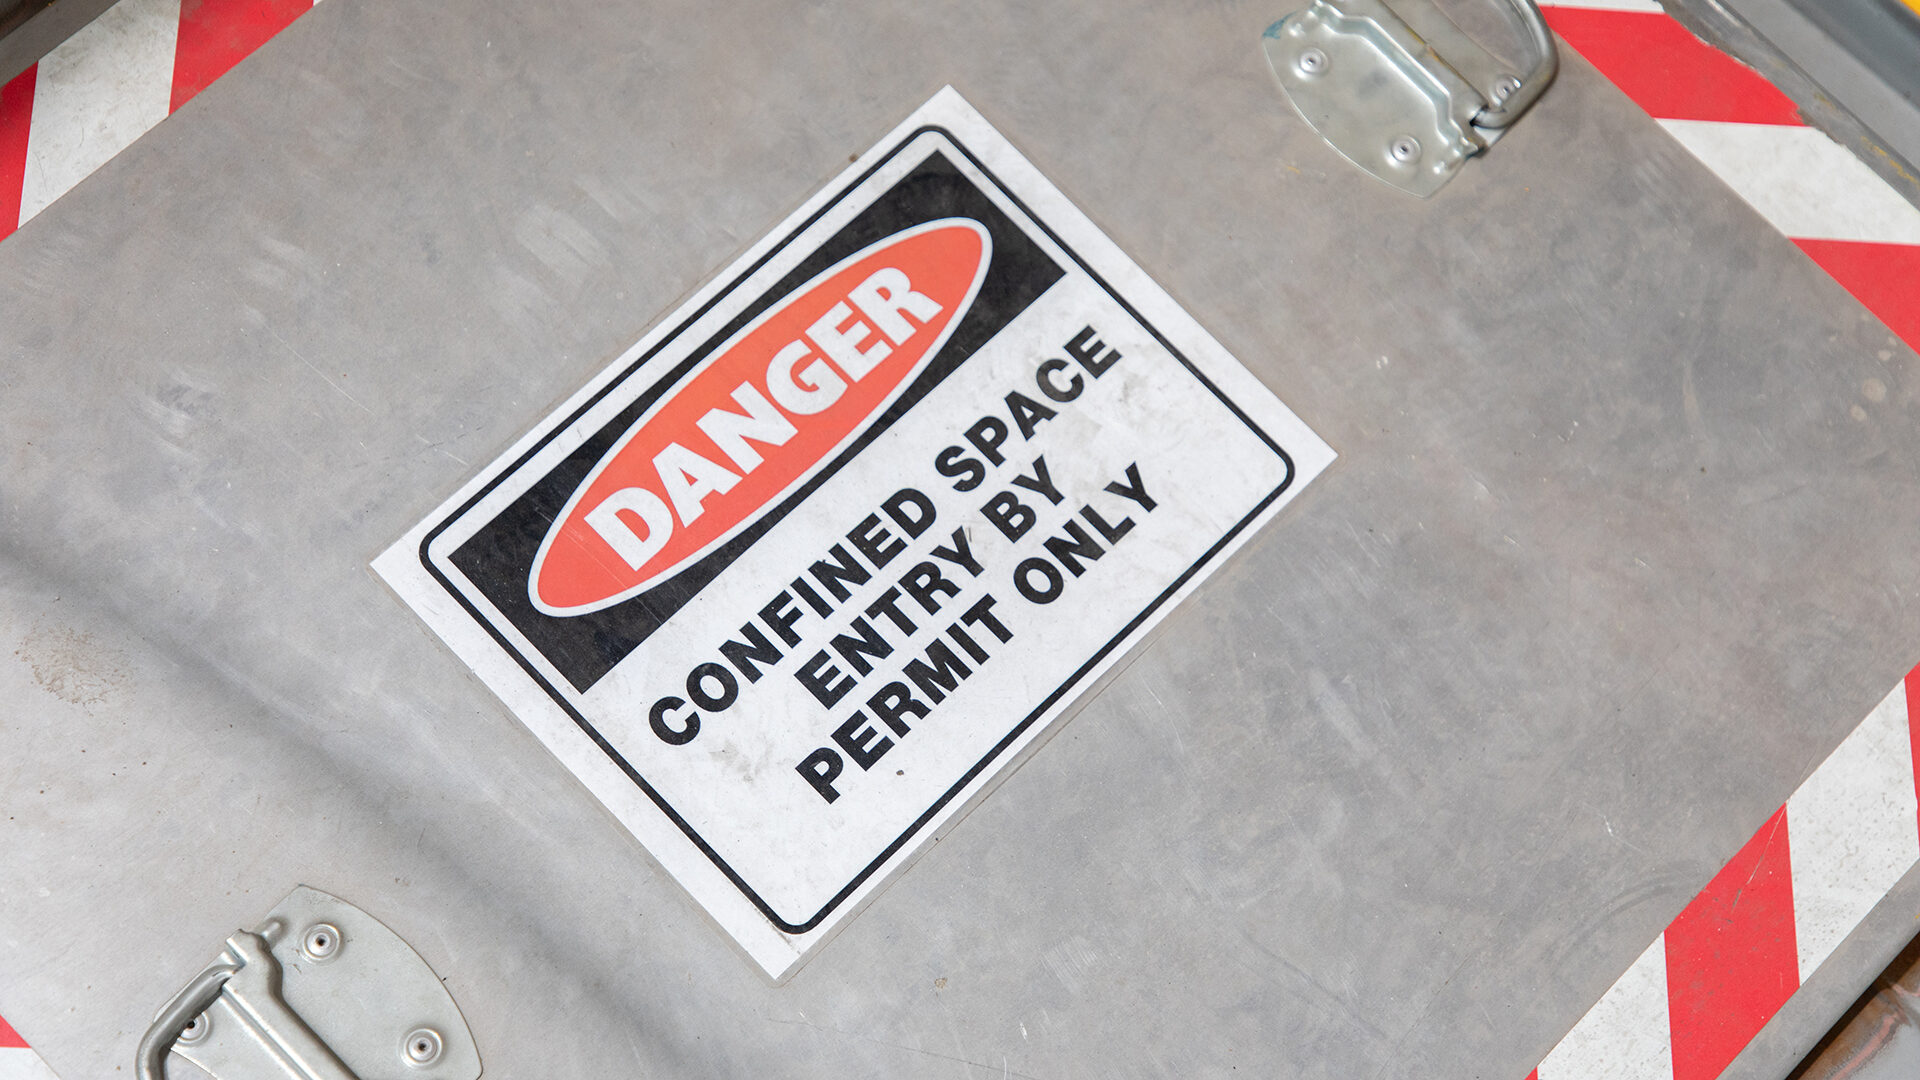 Danger confined space warning on a manhole cover.